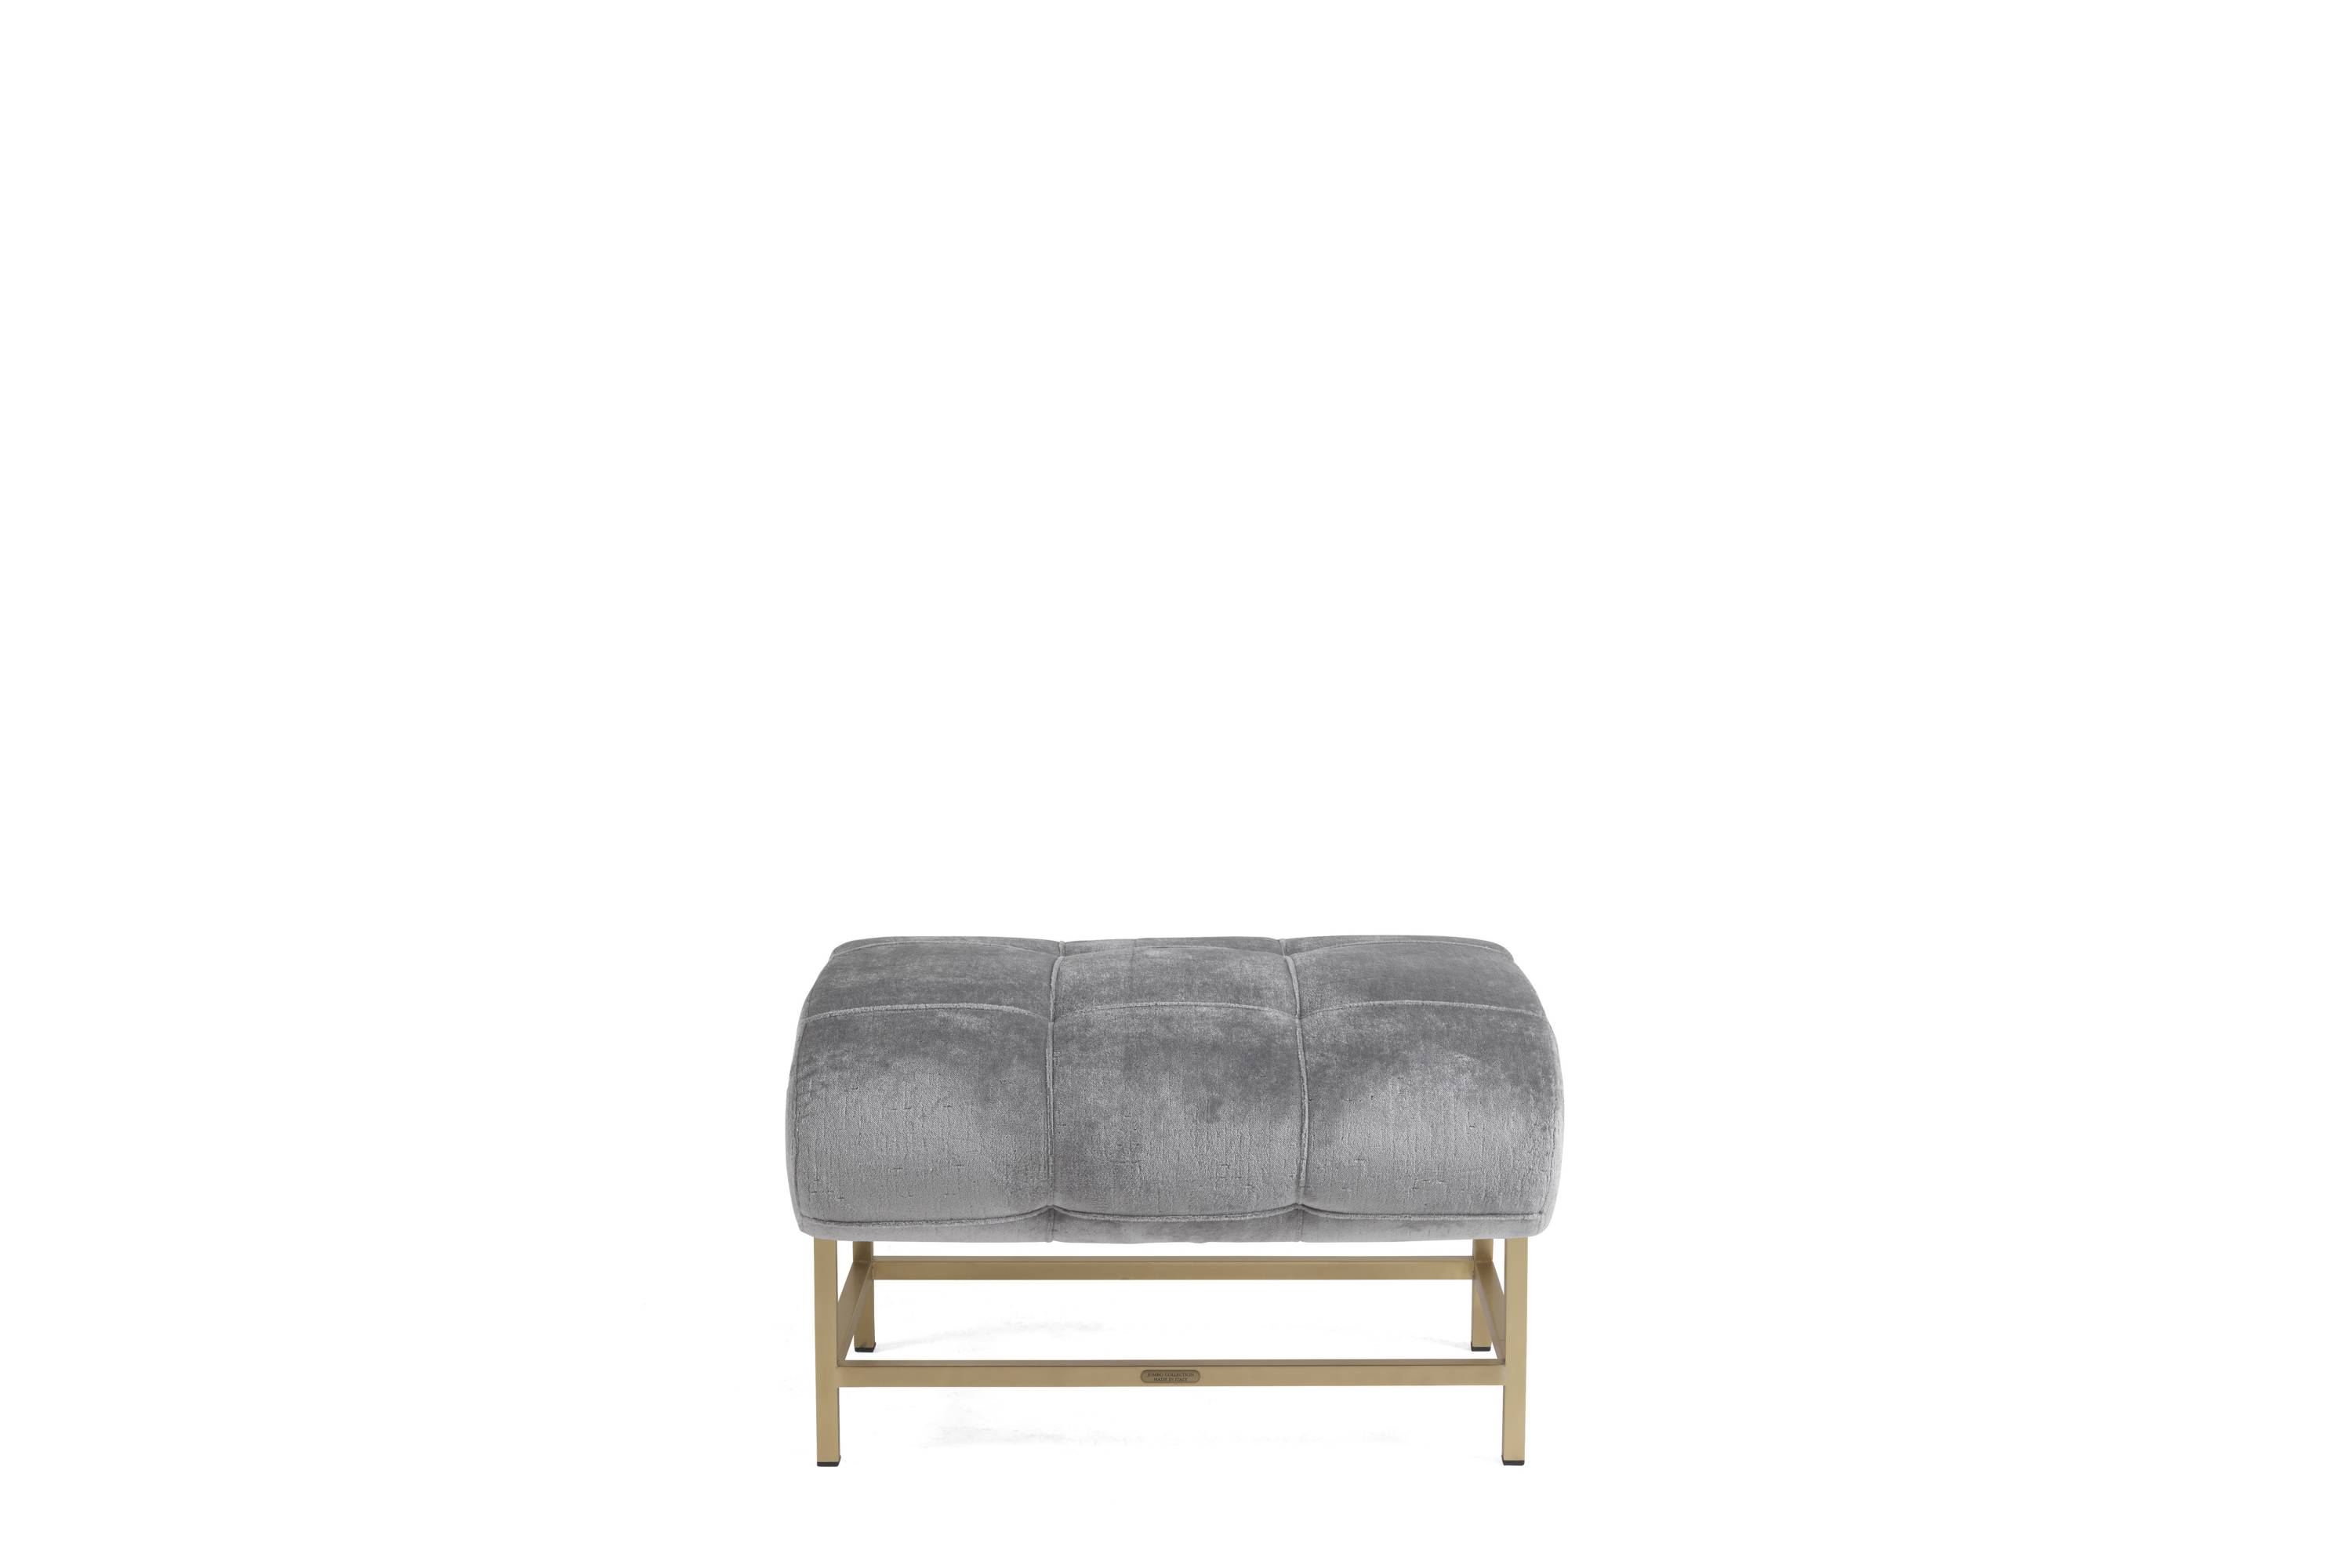 MARQUISE footrest – Jumbo Collection Italian luxury classic poufs and benches. tailor-made interior design projects to meet all your furnishing needs